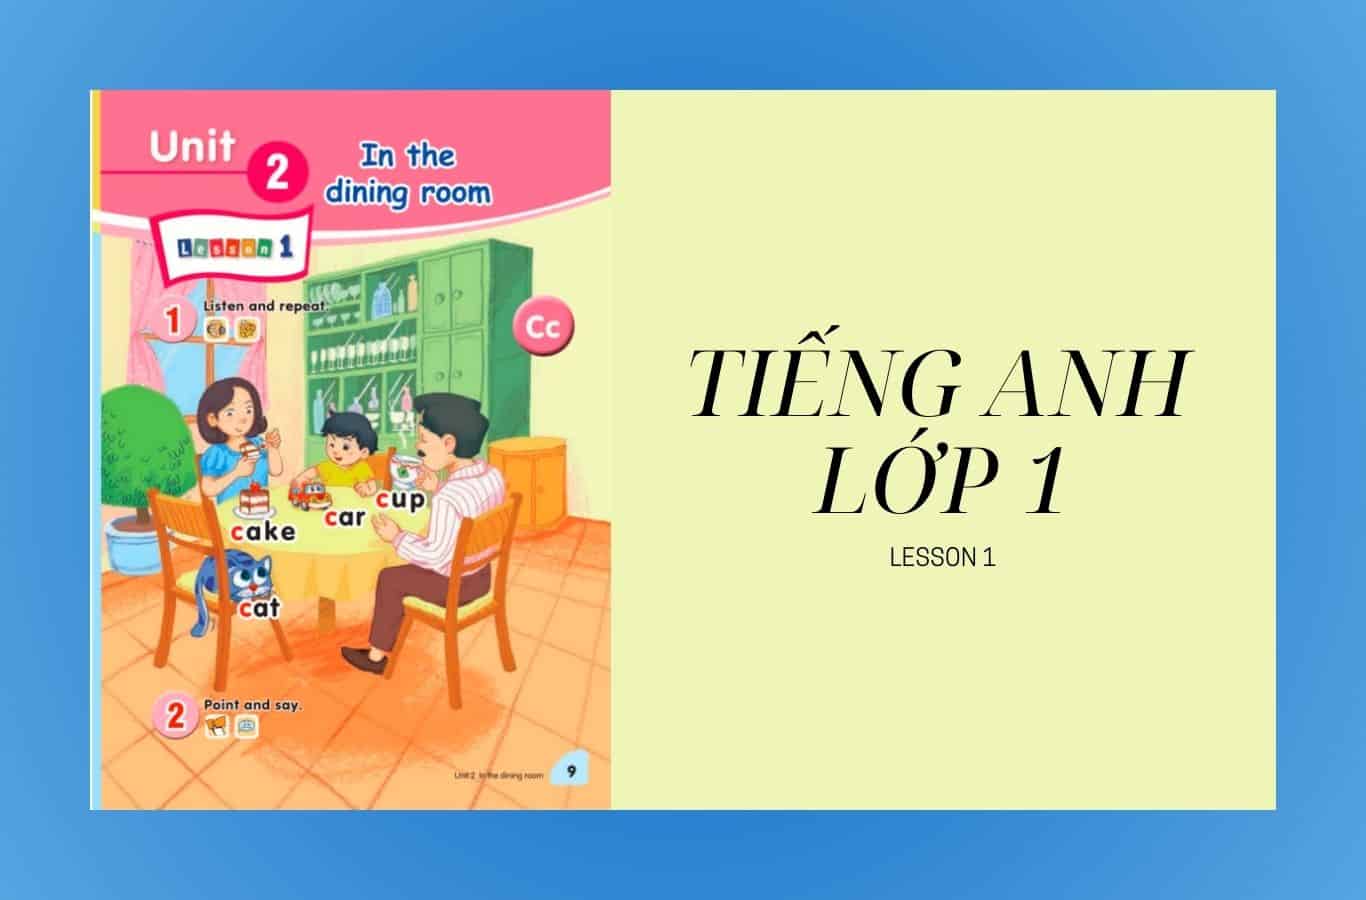 Tiếng Anh lớp 1 Unit 2 lesson 1